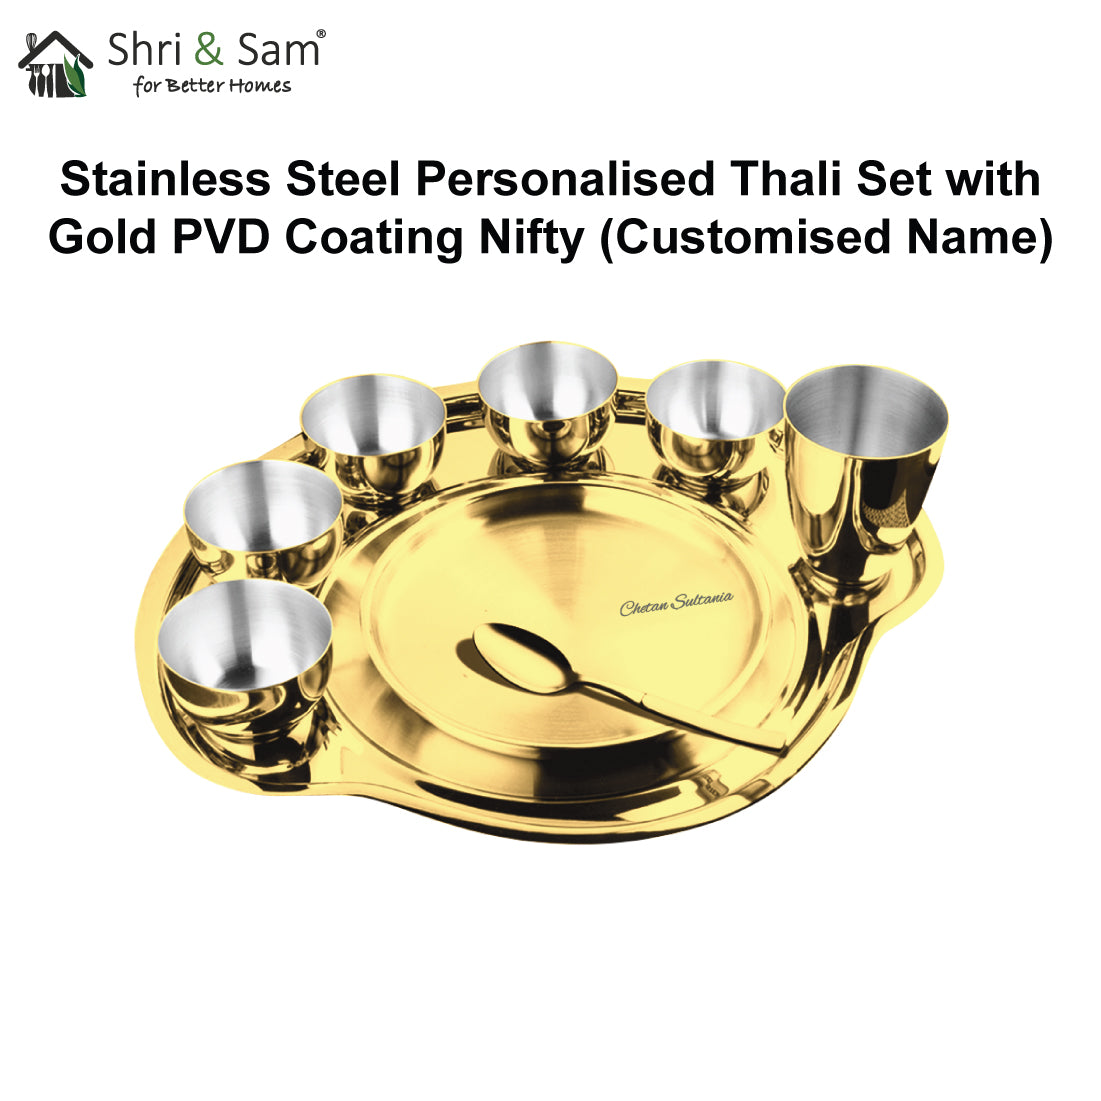 Stainless Steel Personalized Thali Set with Gold PVD Coating Nifty (Customized Name)